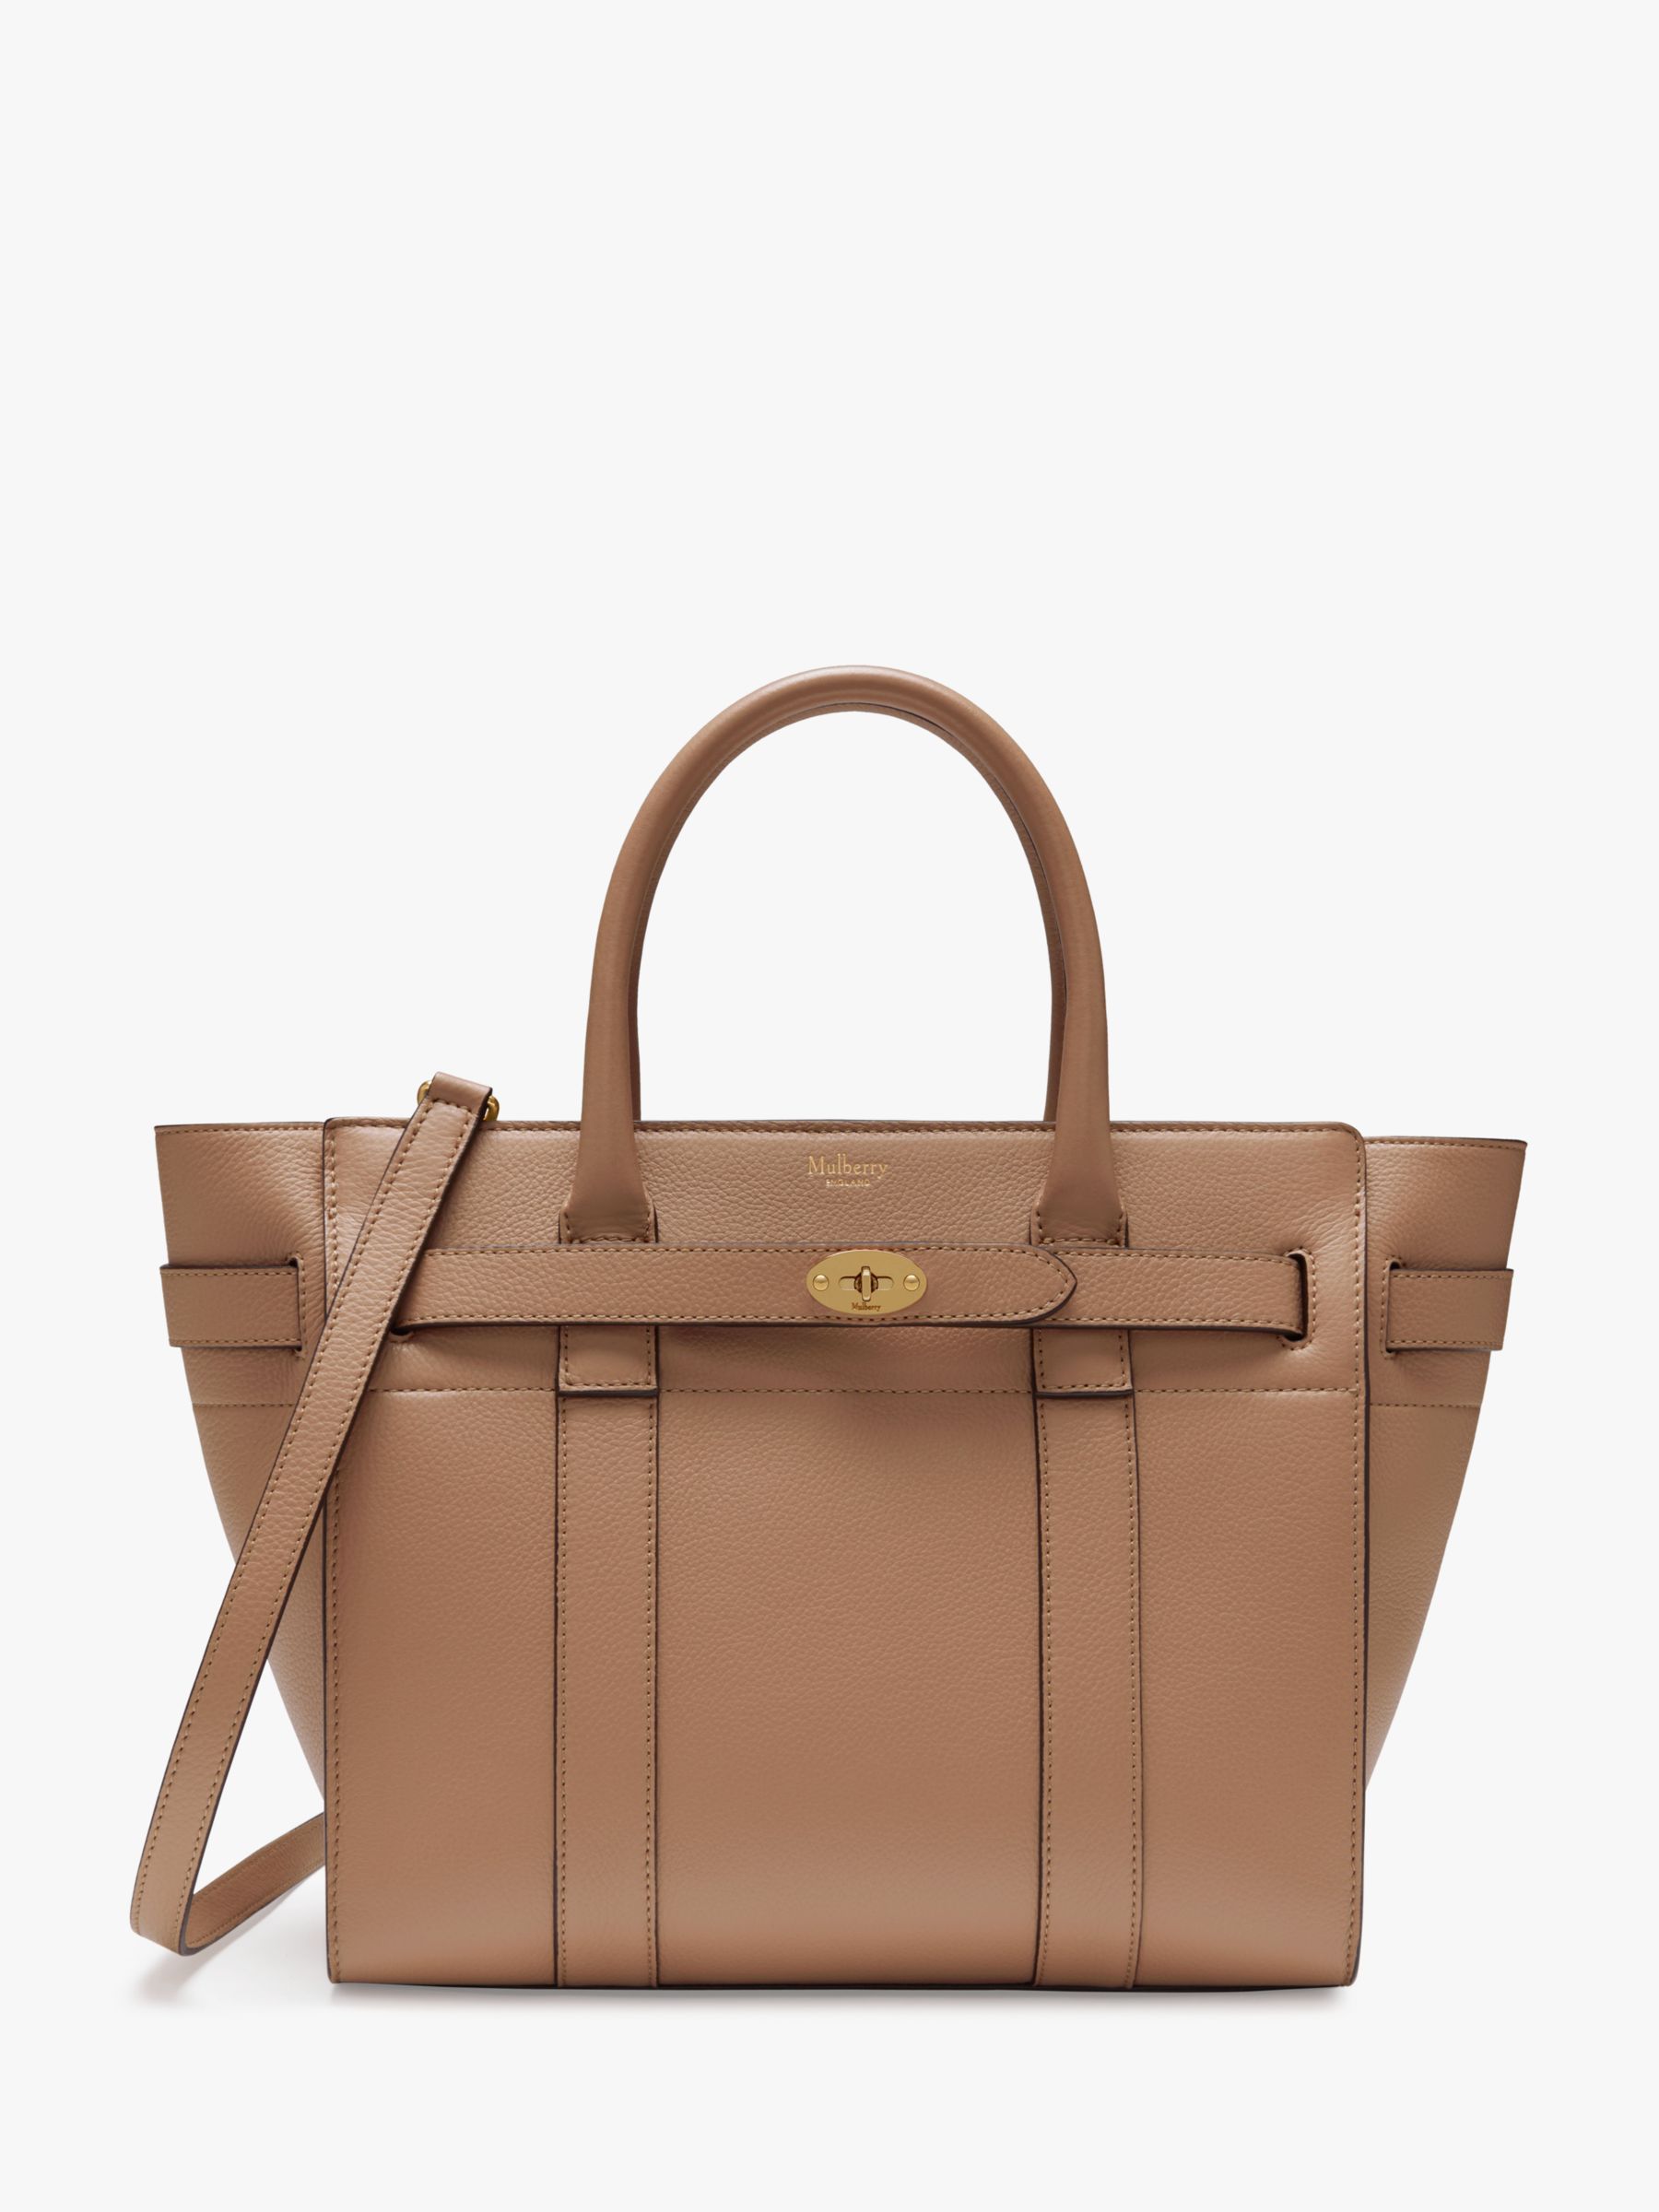 Mulberry Small Bayswater Zipped Classic Grain Leather Tote Bag at John Lewis & Partners